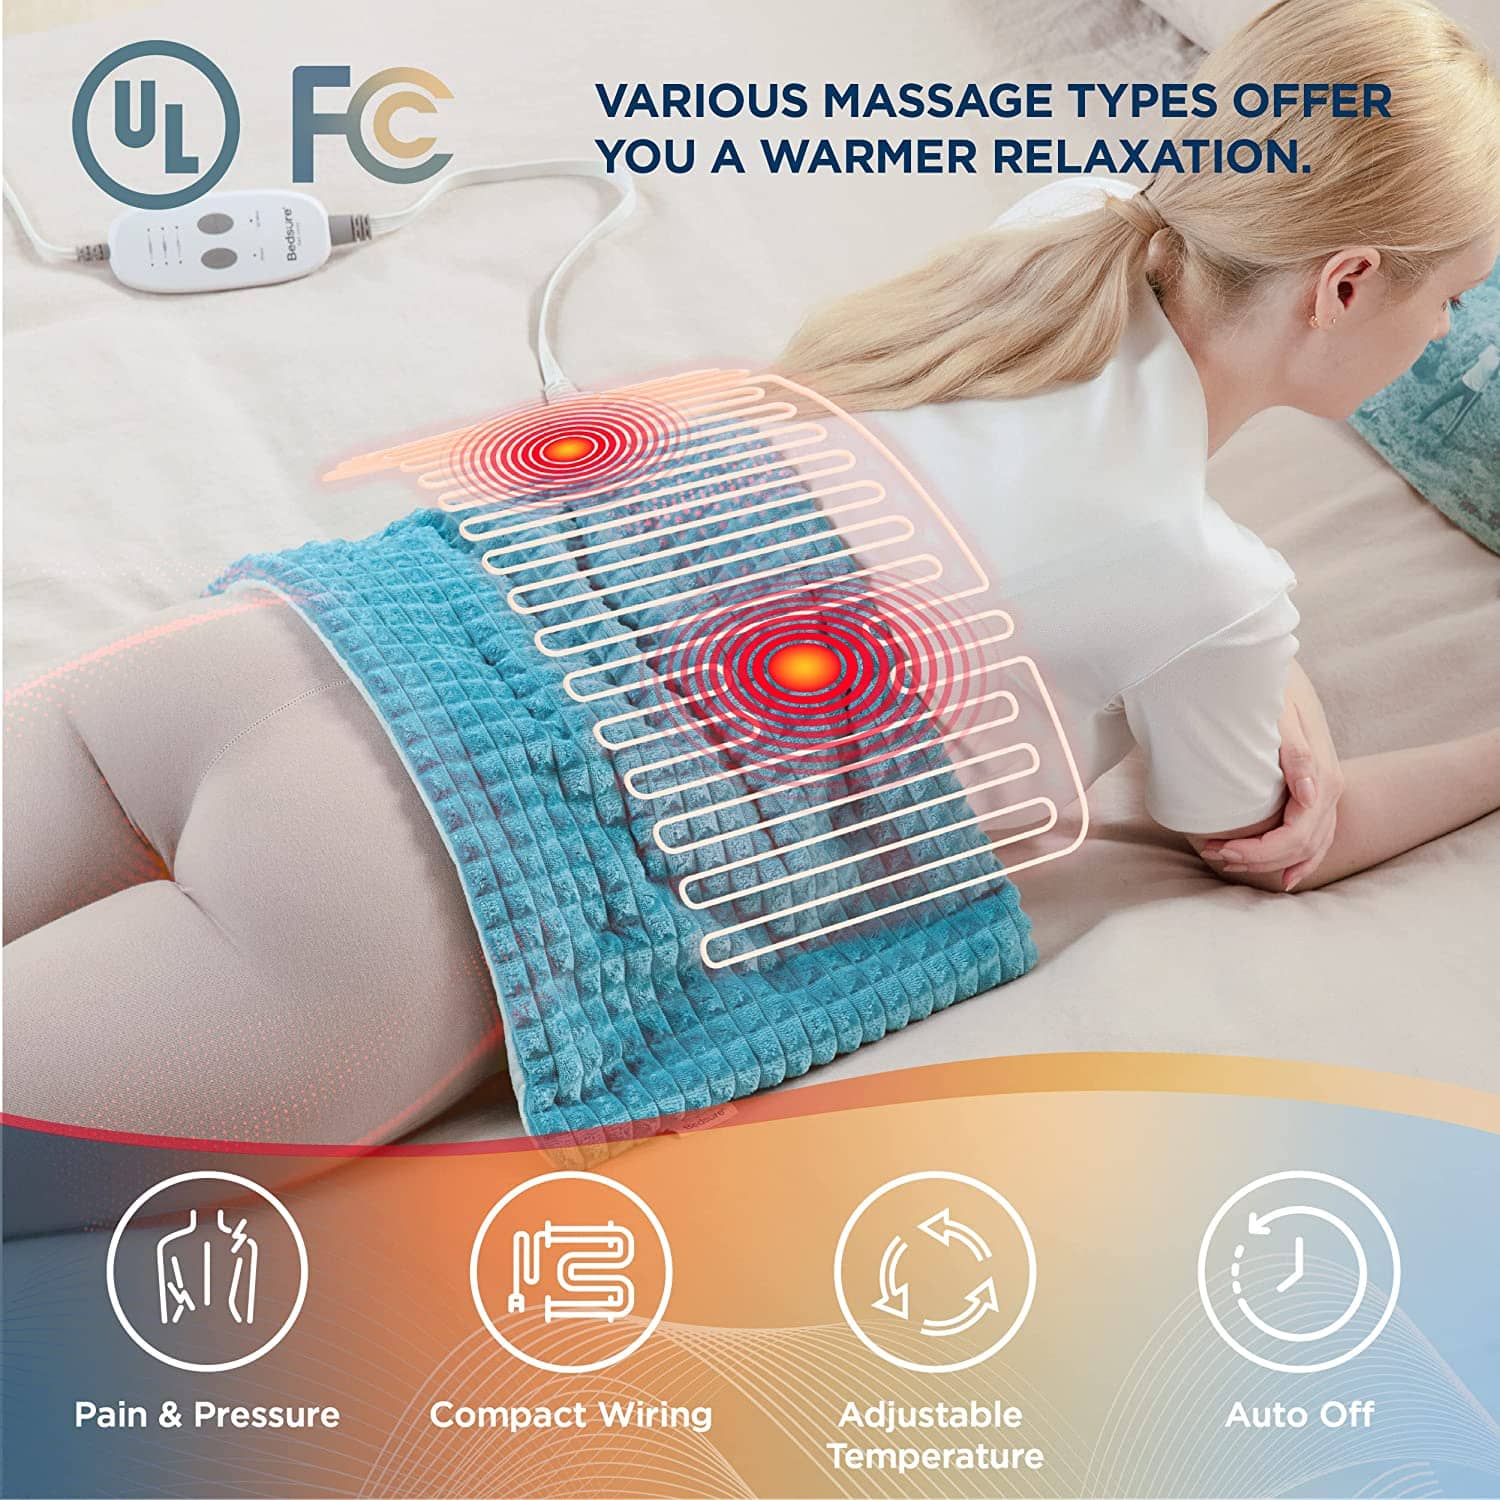 Bedsure Weighted Heating Pad with Massager - Electric Heating Pad for Back  Pain Relief with Massaging Vibrations, 3 Heating Levels & 3 Massage Types,  9 Relaxing Combinations, 12” x 24”, 5lbs, Grey Large Grey